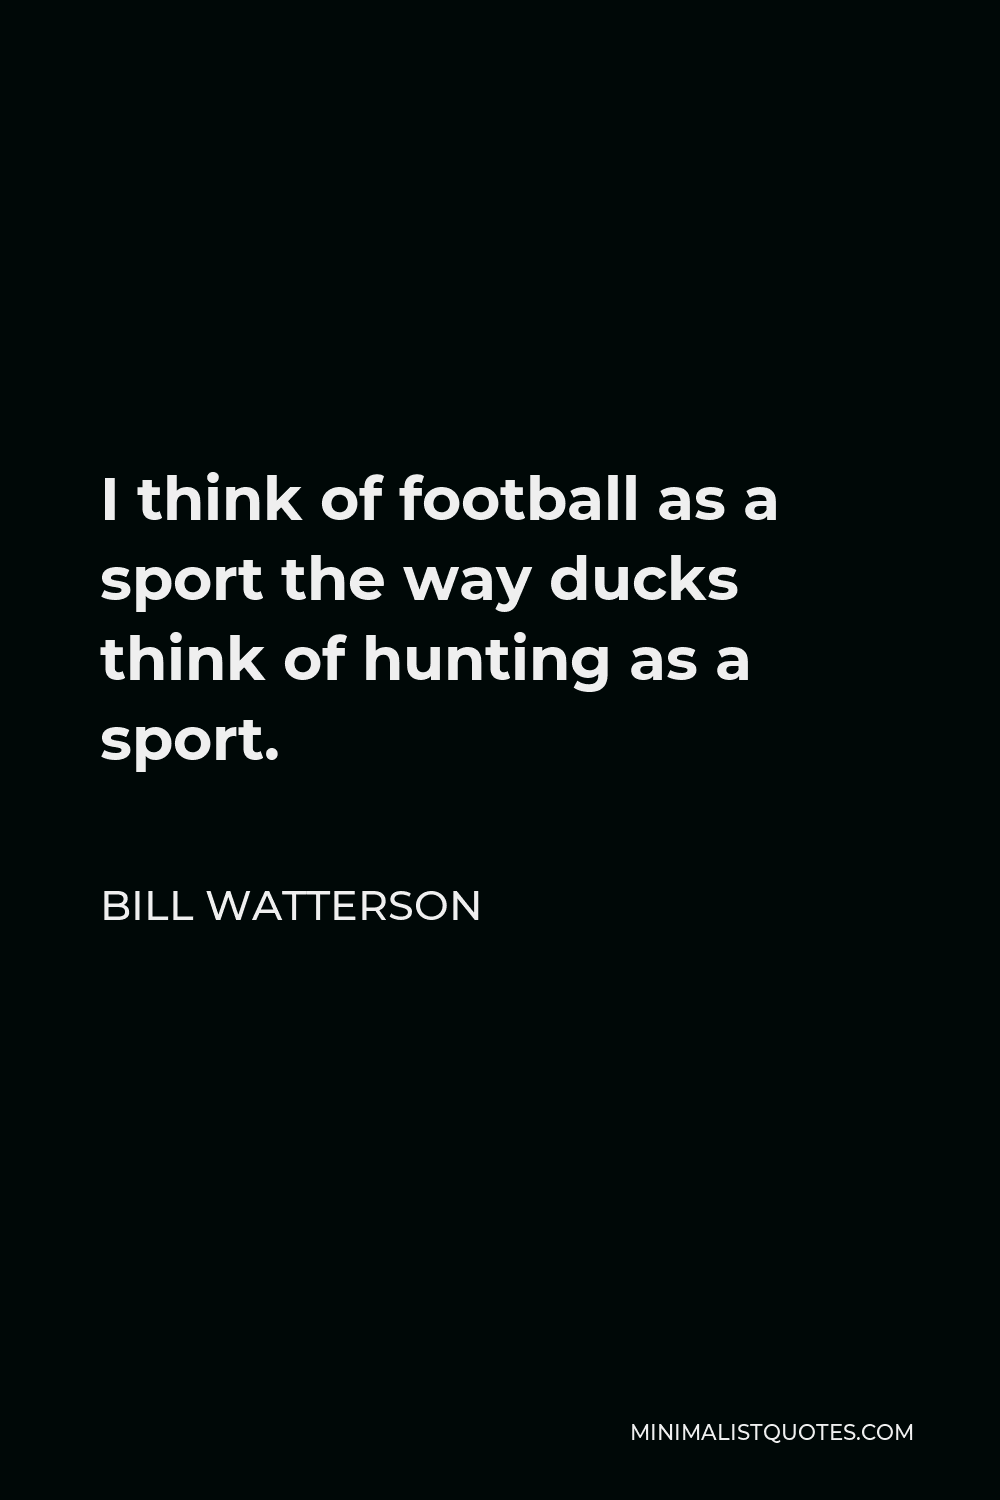 Bill Watterson Quote - I think of football as a sport the way ducks think of hunting as a sport.